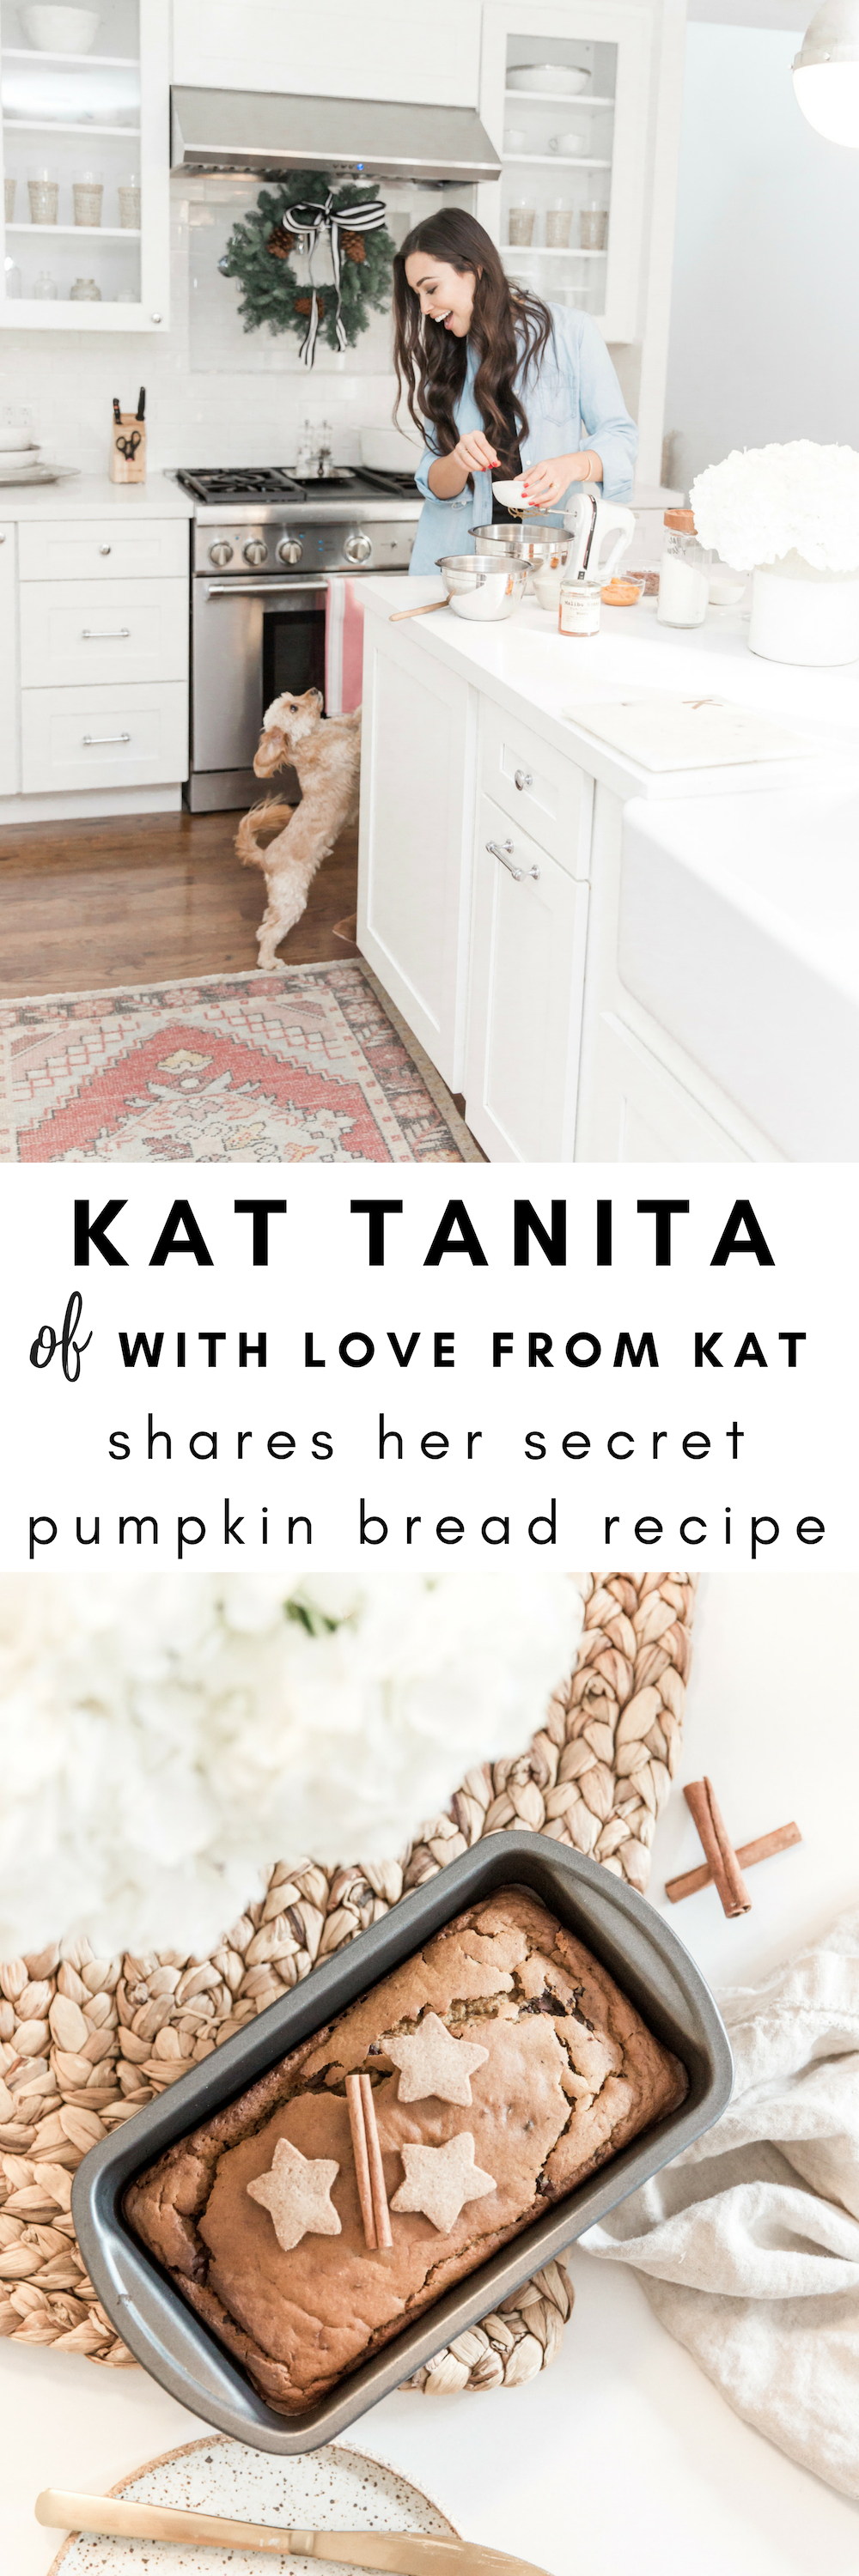 With Love From Kat Pumpkin Bread Recipe